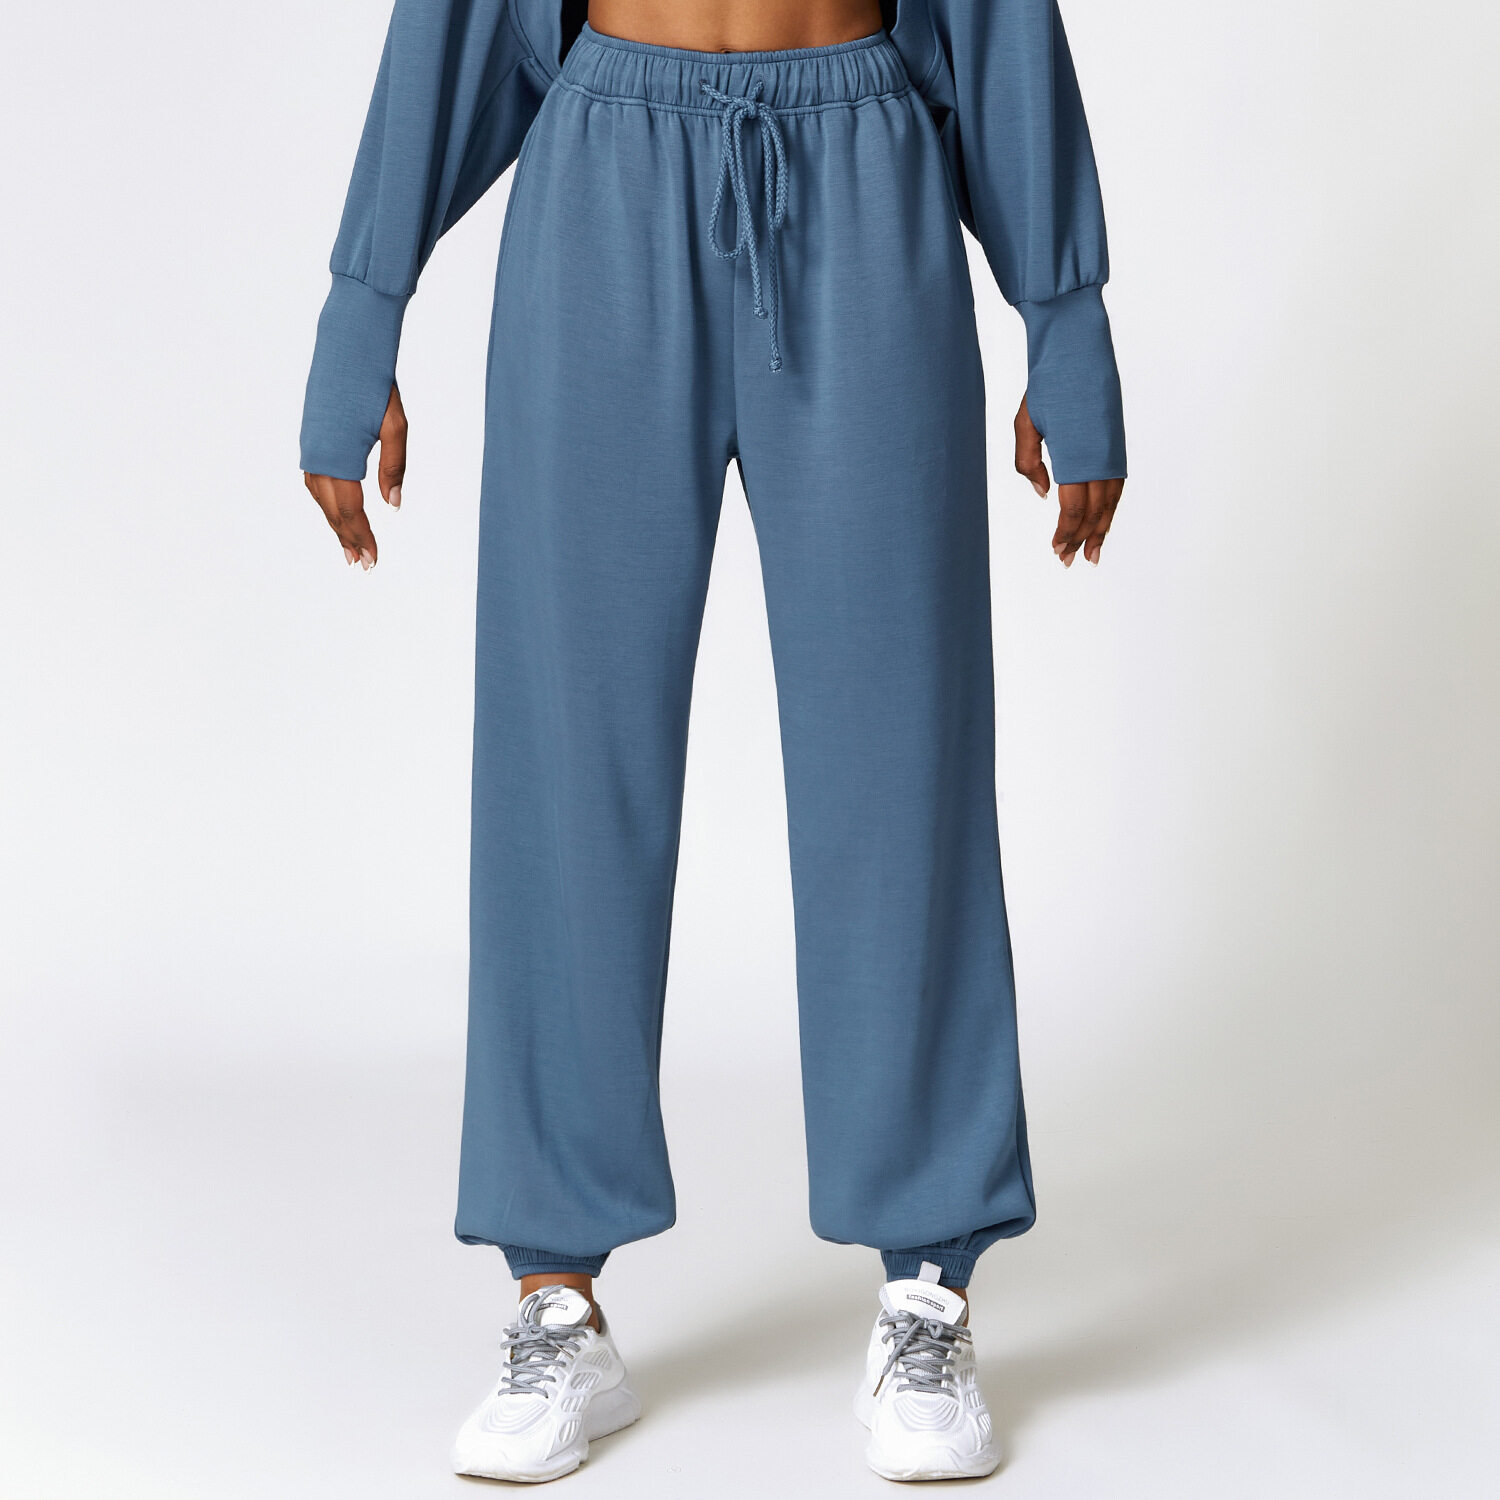 Winter High-Waisted Casual Women's Comfy Jogger Pants